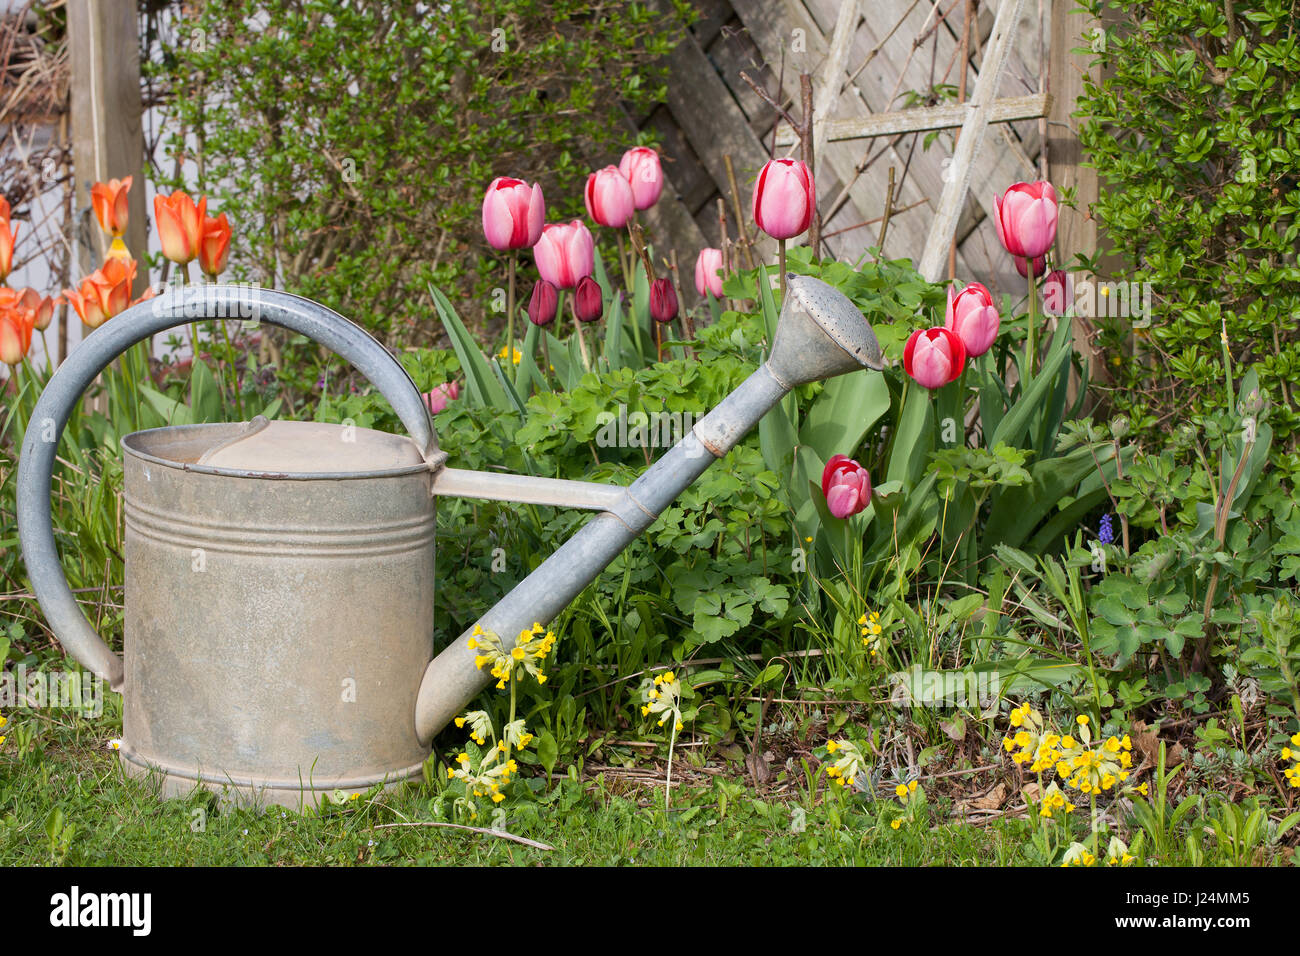 Old metal watering can in the garden with tulips and cowslips Stock Photo